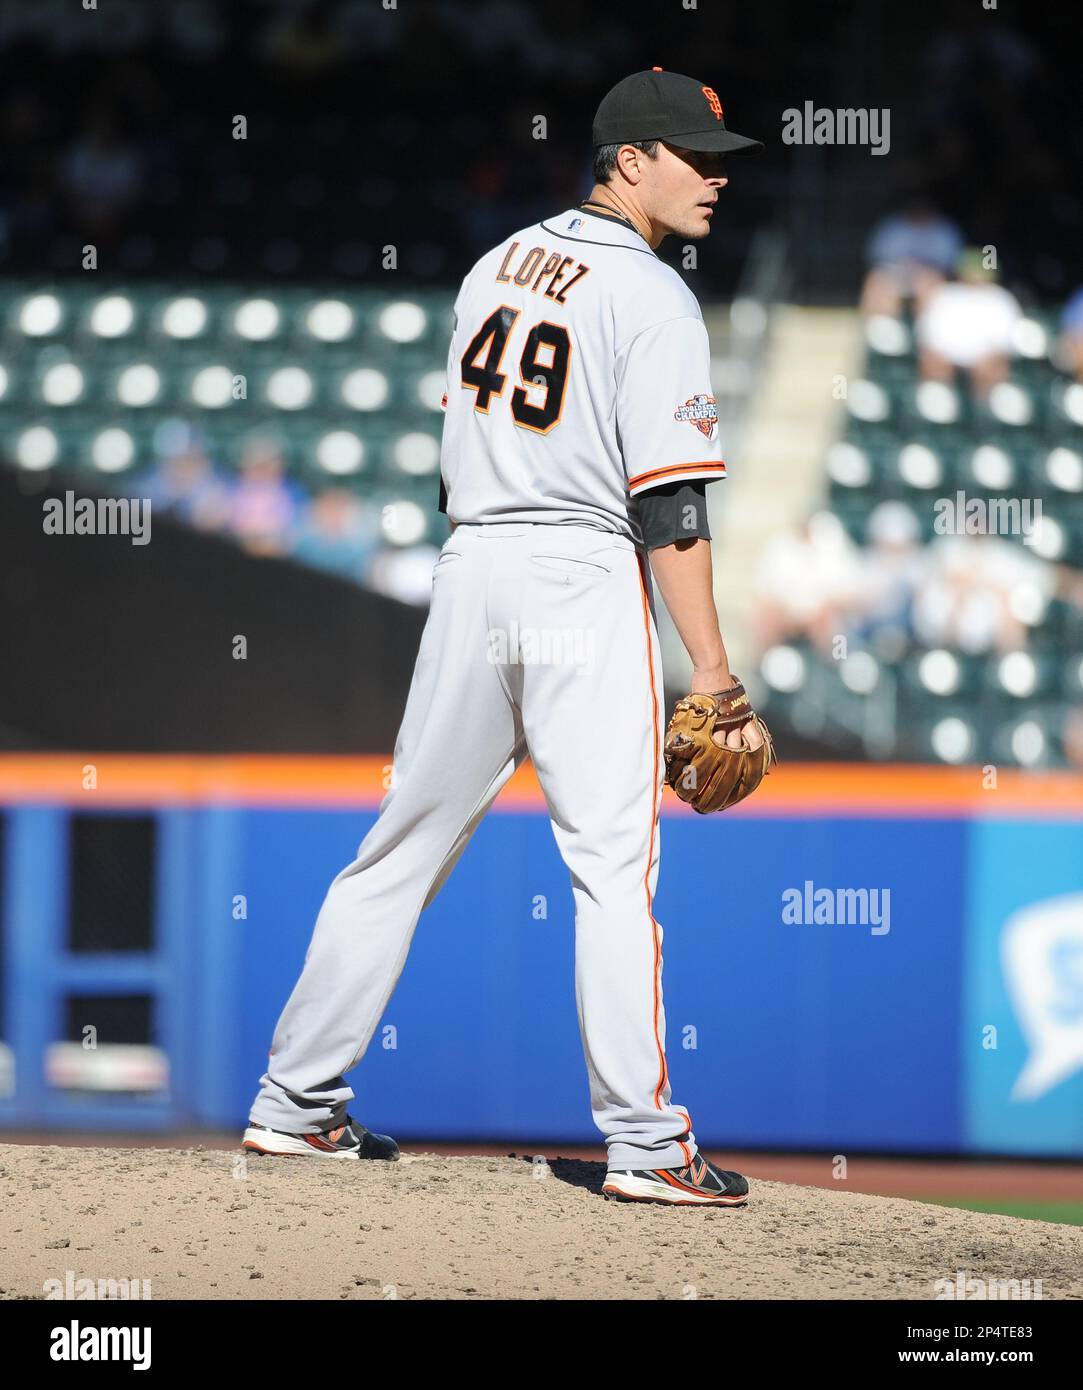 San Francisco Giants pitcher Javier Lopez (49) during game against the New  York Mets at Citi Field in Queens, New York; September 19, 2013. Giants  defeated Mets 2-1. (AP Photo/Tomasso DeRosa Stock Photo - Alamy